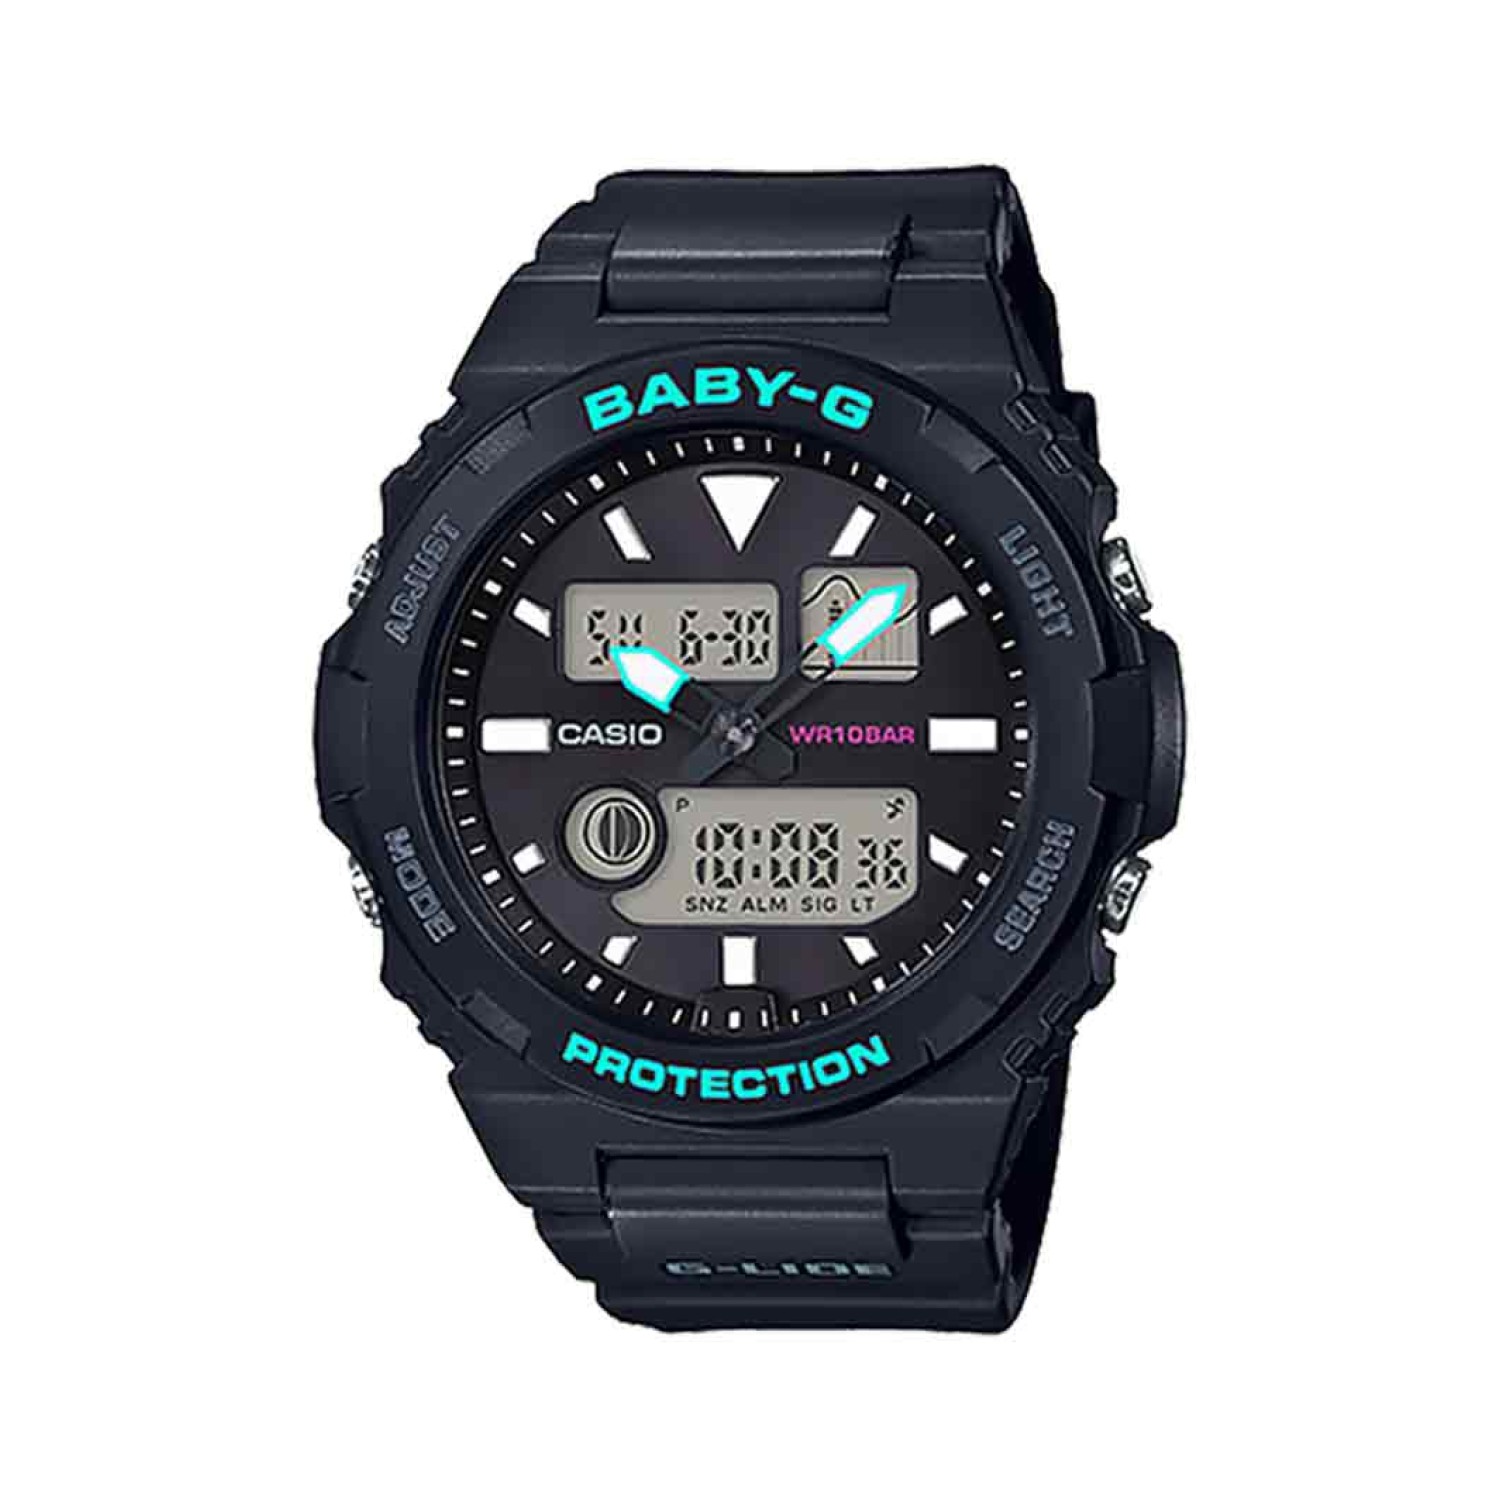 BAX100-1A Casio BabY-G G-LIDE. These new analog-digital additions to the BABY-G G-LIDE sports lineup with Tide Graph capabilities go great with surfing and other casual styles.  Unique thin-case designs are created based on the G-SHOCK like for casio digi